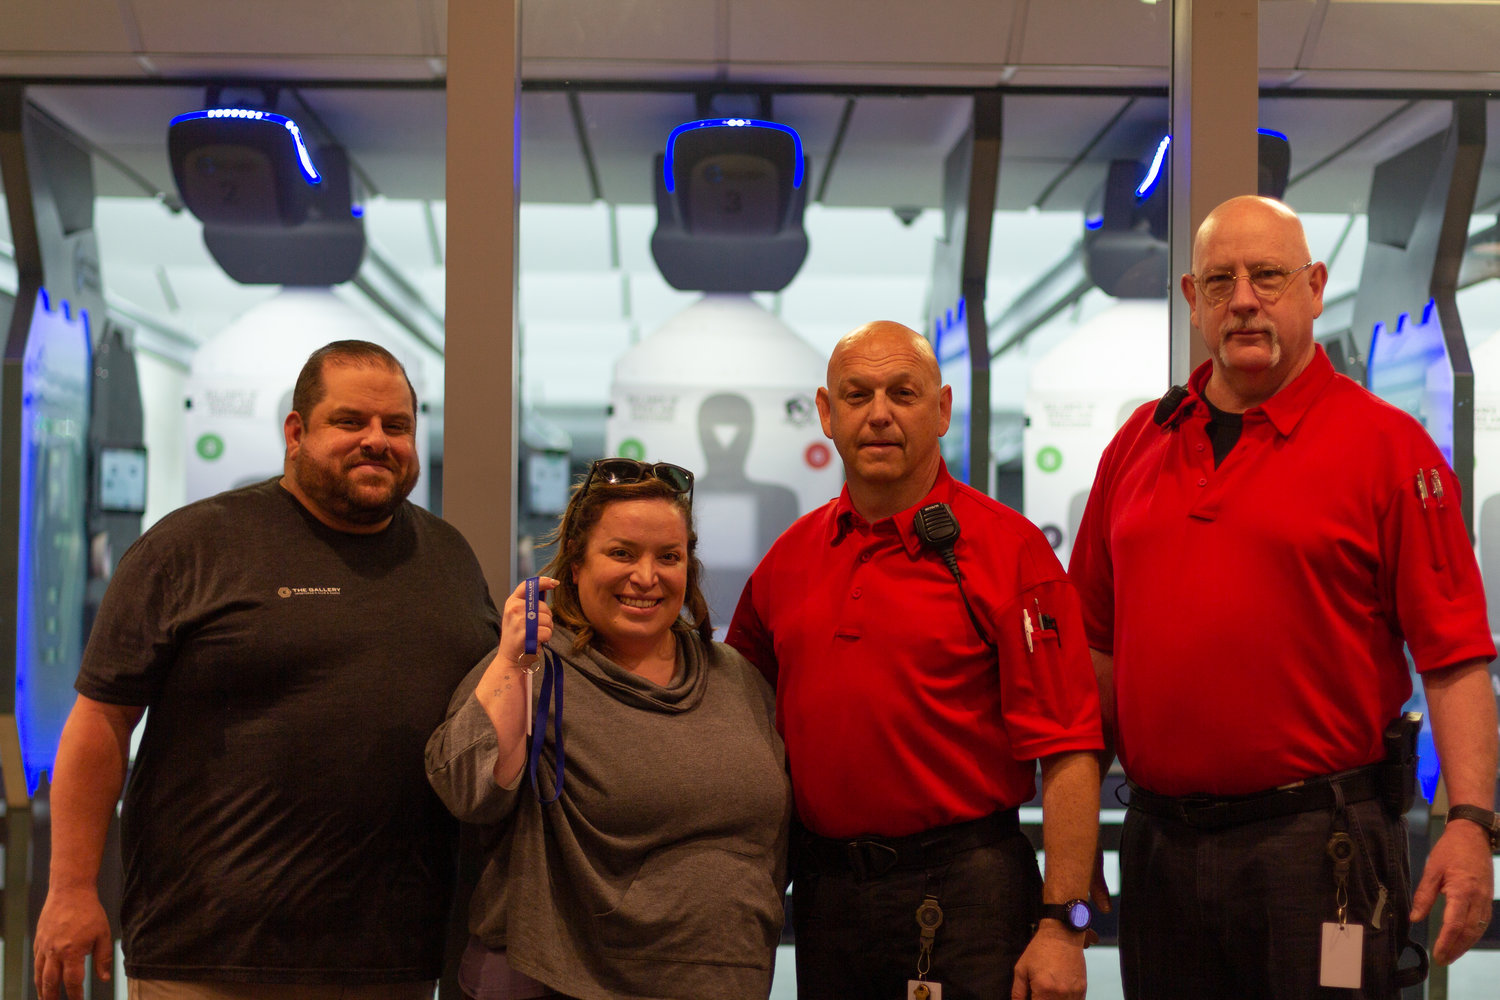 Megan Hymanson, surrounded by members of her staff, holds up an electronic card used to access shooting ranges at The Gallery, Sportsman's Club and Range in Lakewood.